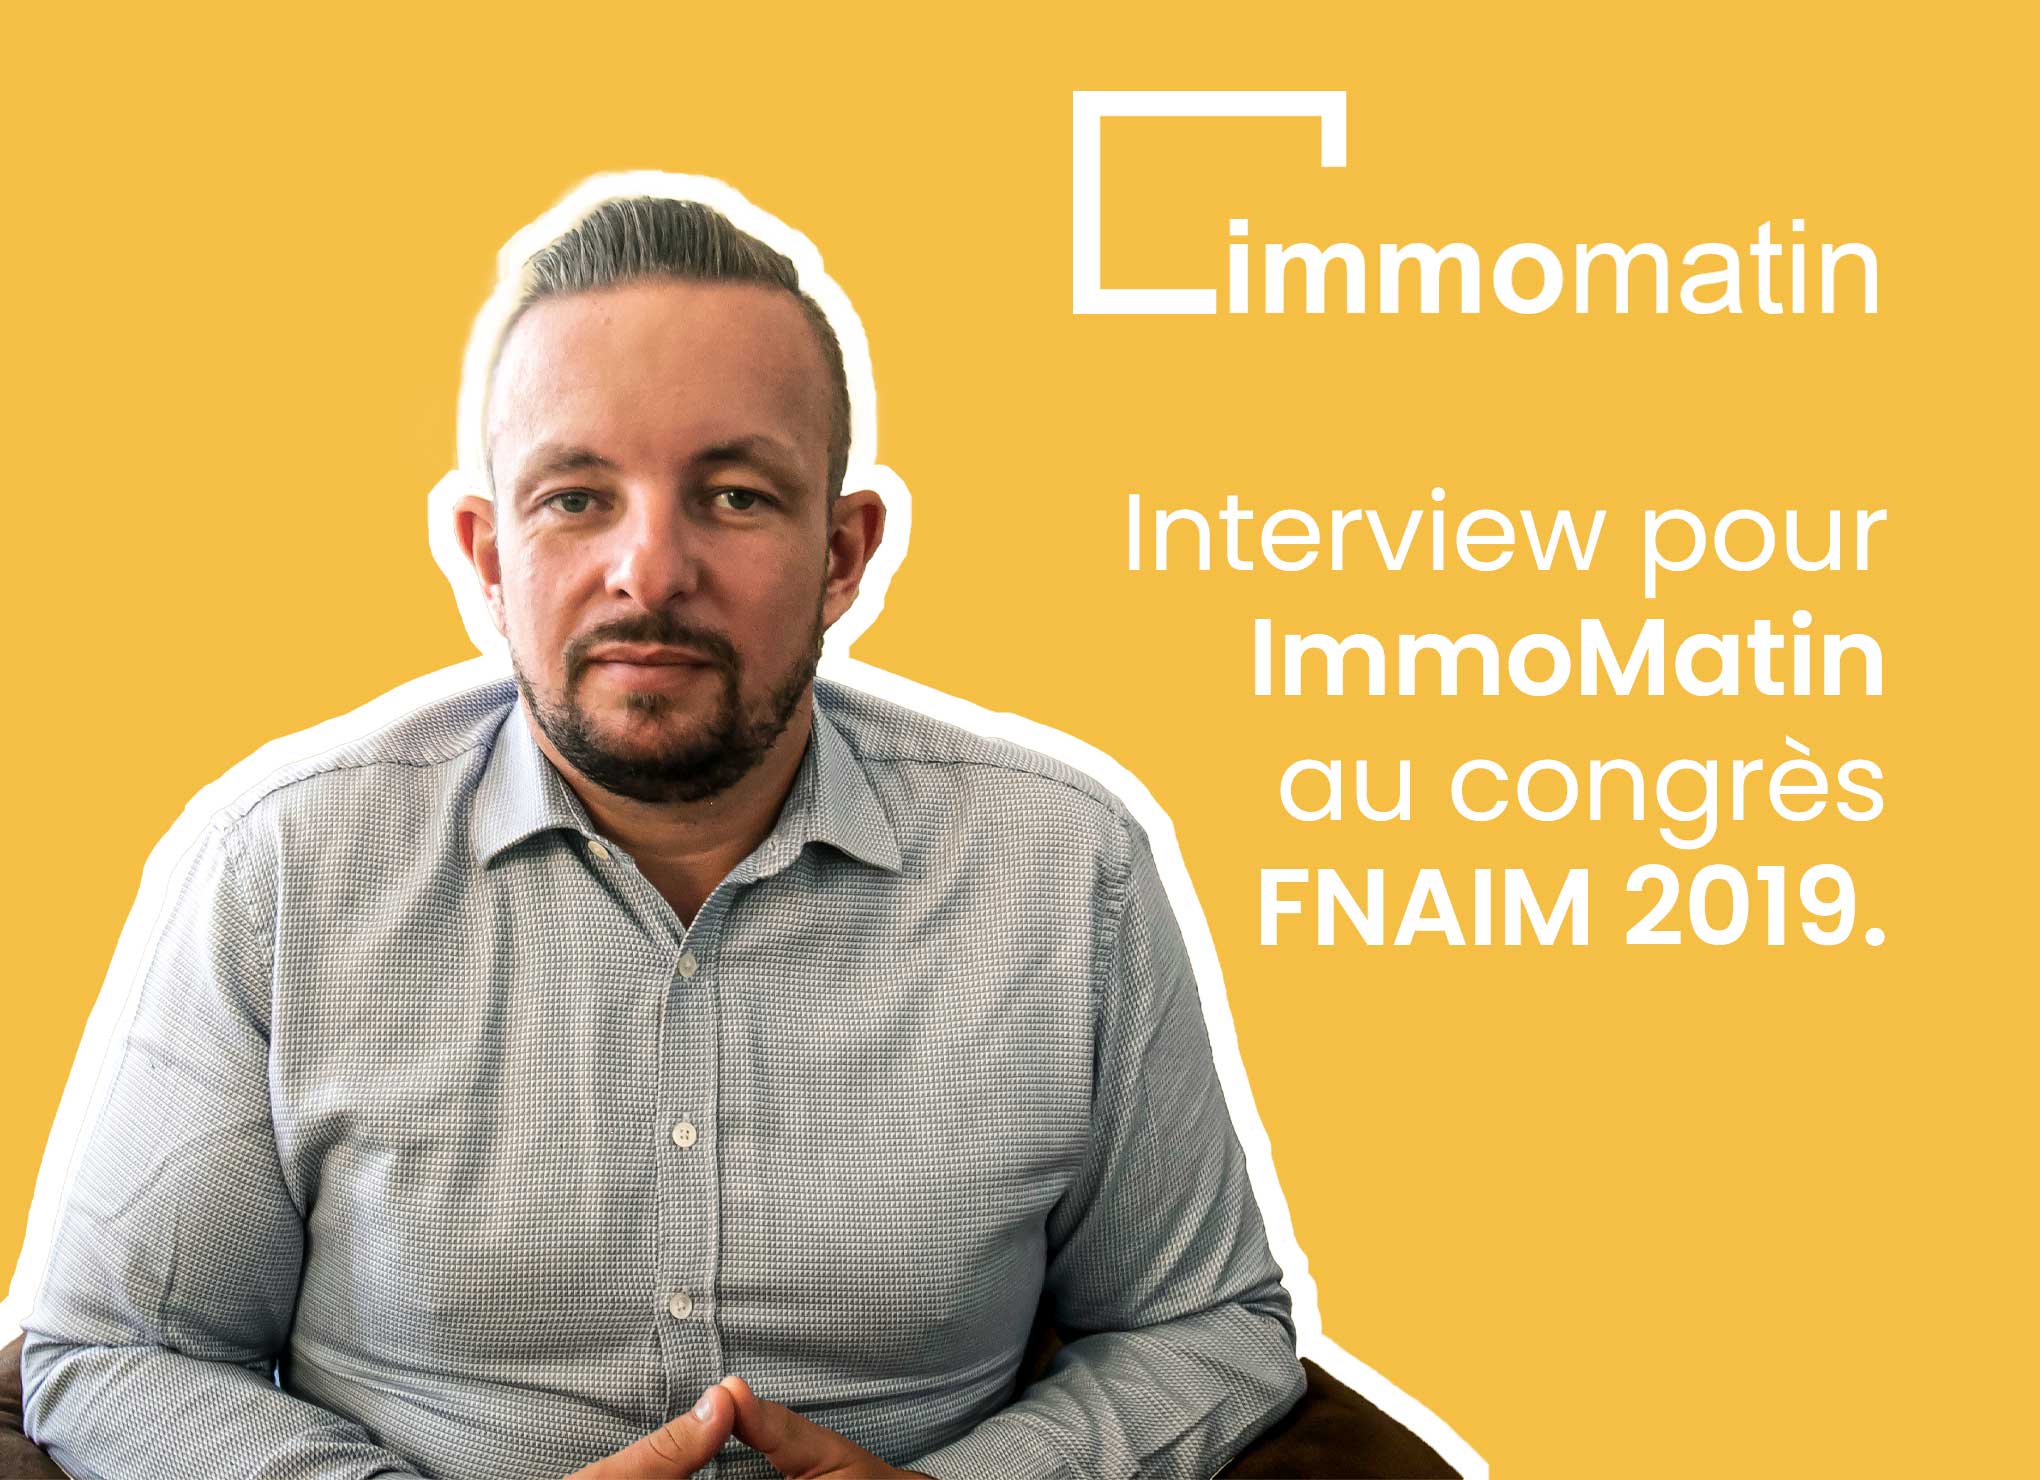 romain-solenne-interview-immomatin